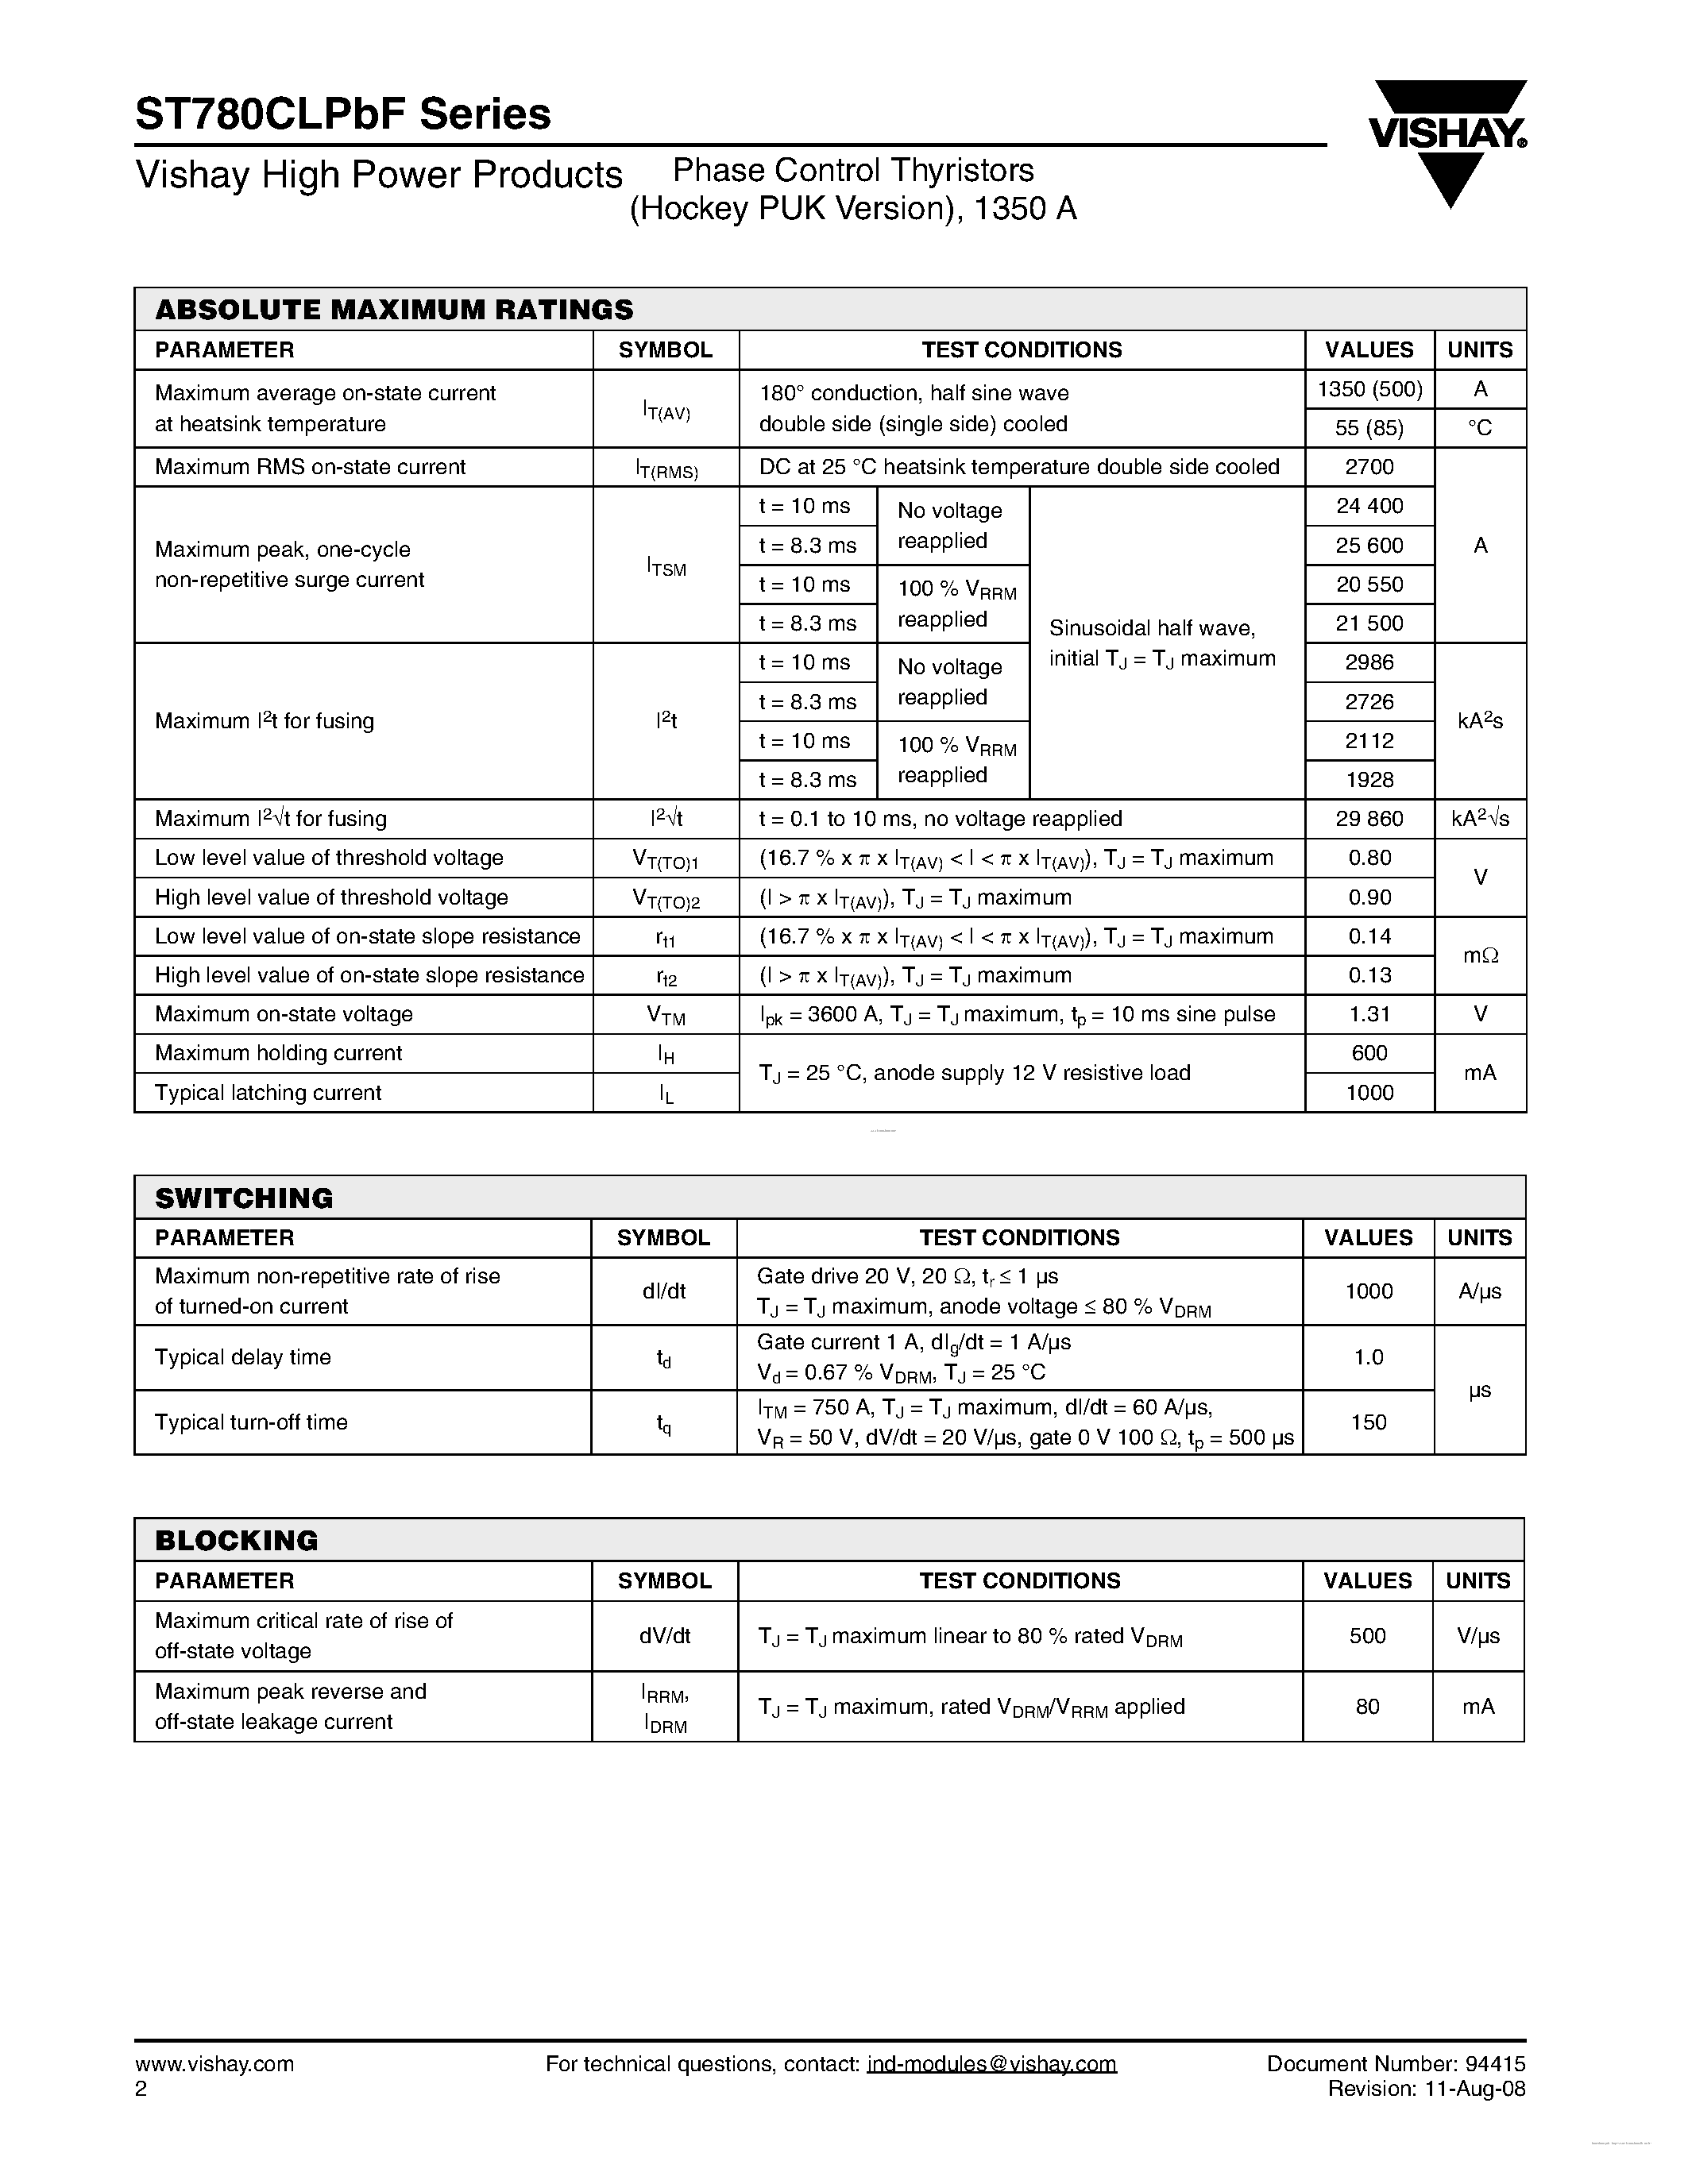 Datasheet ST780CLPBF - page 2